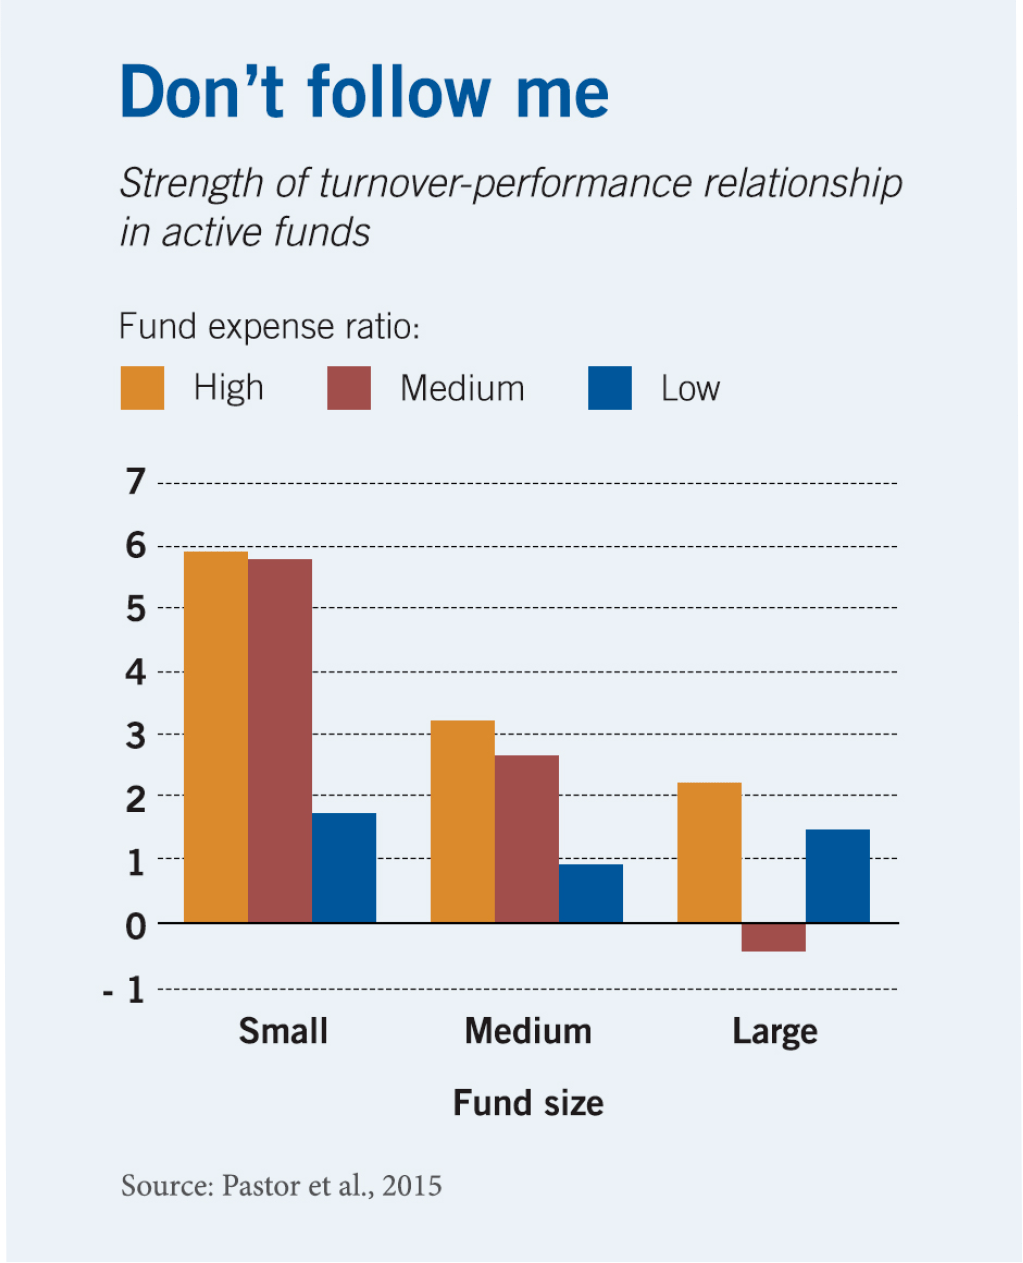 A bar chart plotting the strength of turnover-performance relationship in active funds, with values ranging from negative one to seven on the y-axis and categories for small, medium, and large funds on the x-axis. One set of bars tracks high fund expense ratio and ranges from six for small funds to two for large funds. Bars tracking medium expense ratio range from five-point-nine to negative zero-point-three. And bars tracking low fund expense ratio range from one-point-eight to zero-point-nine.